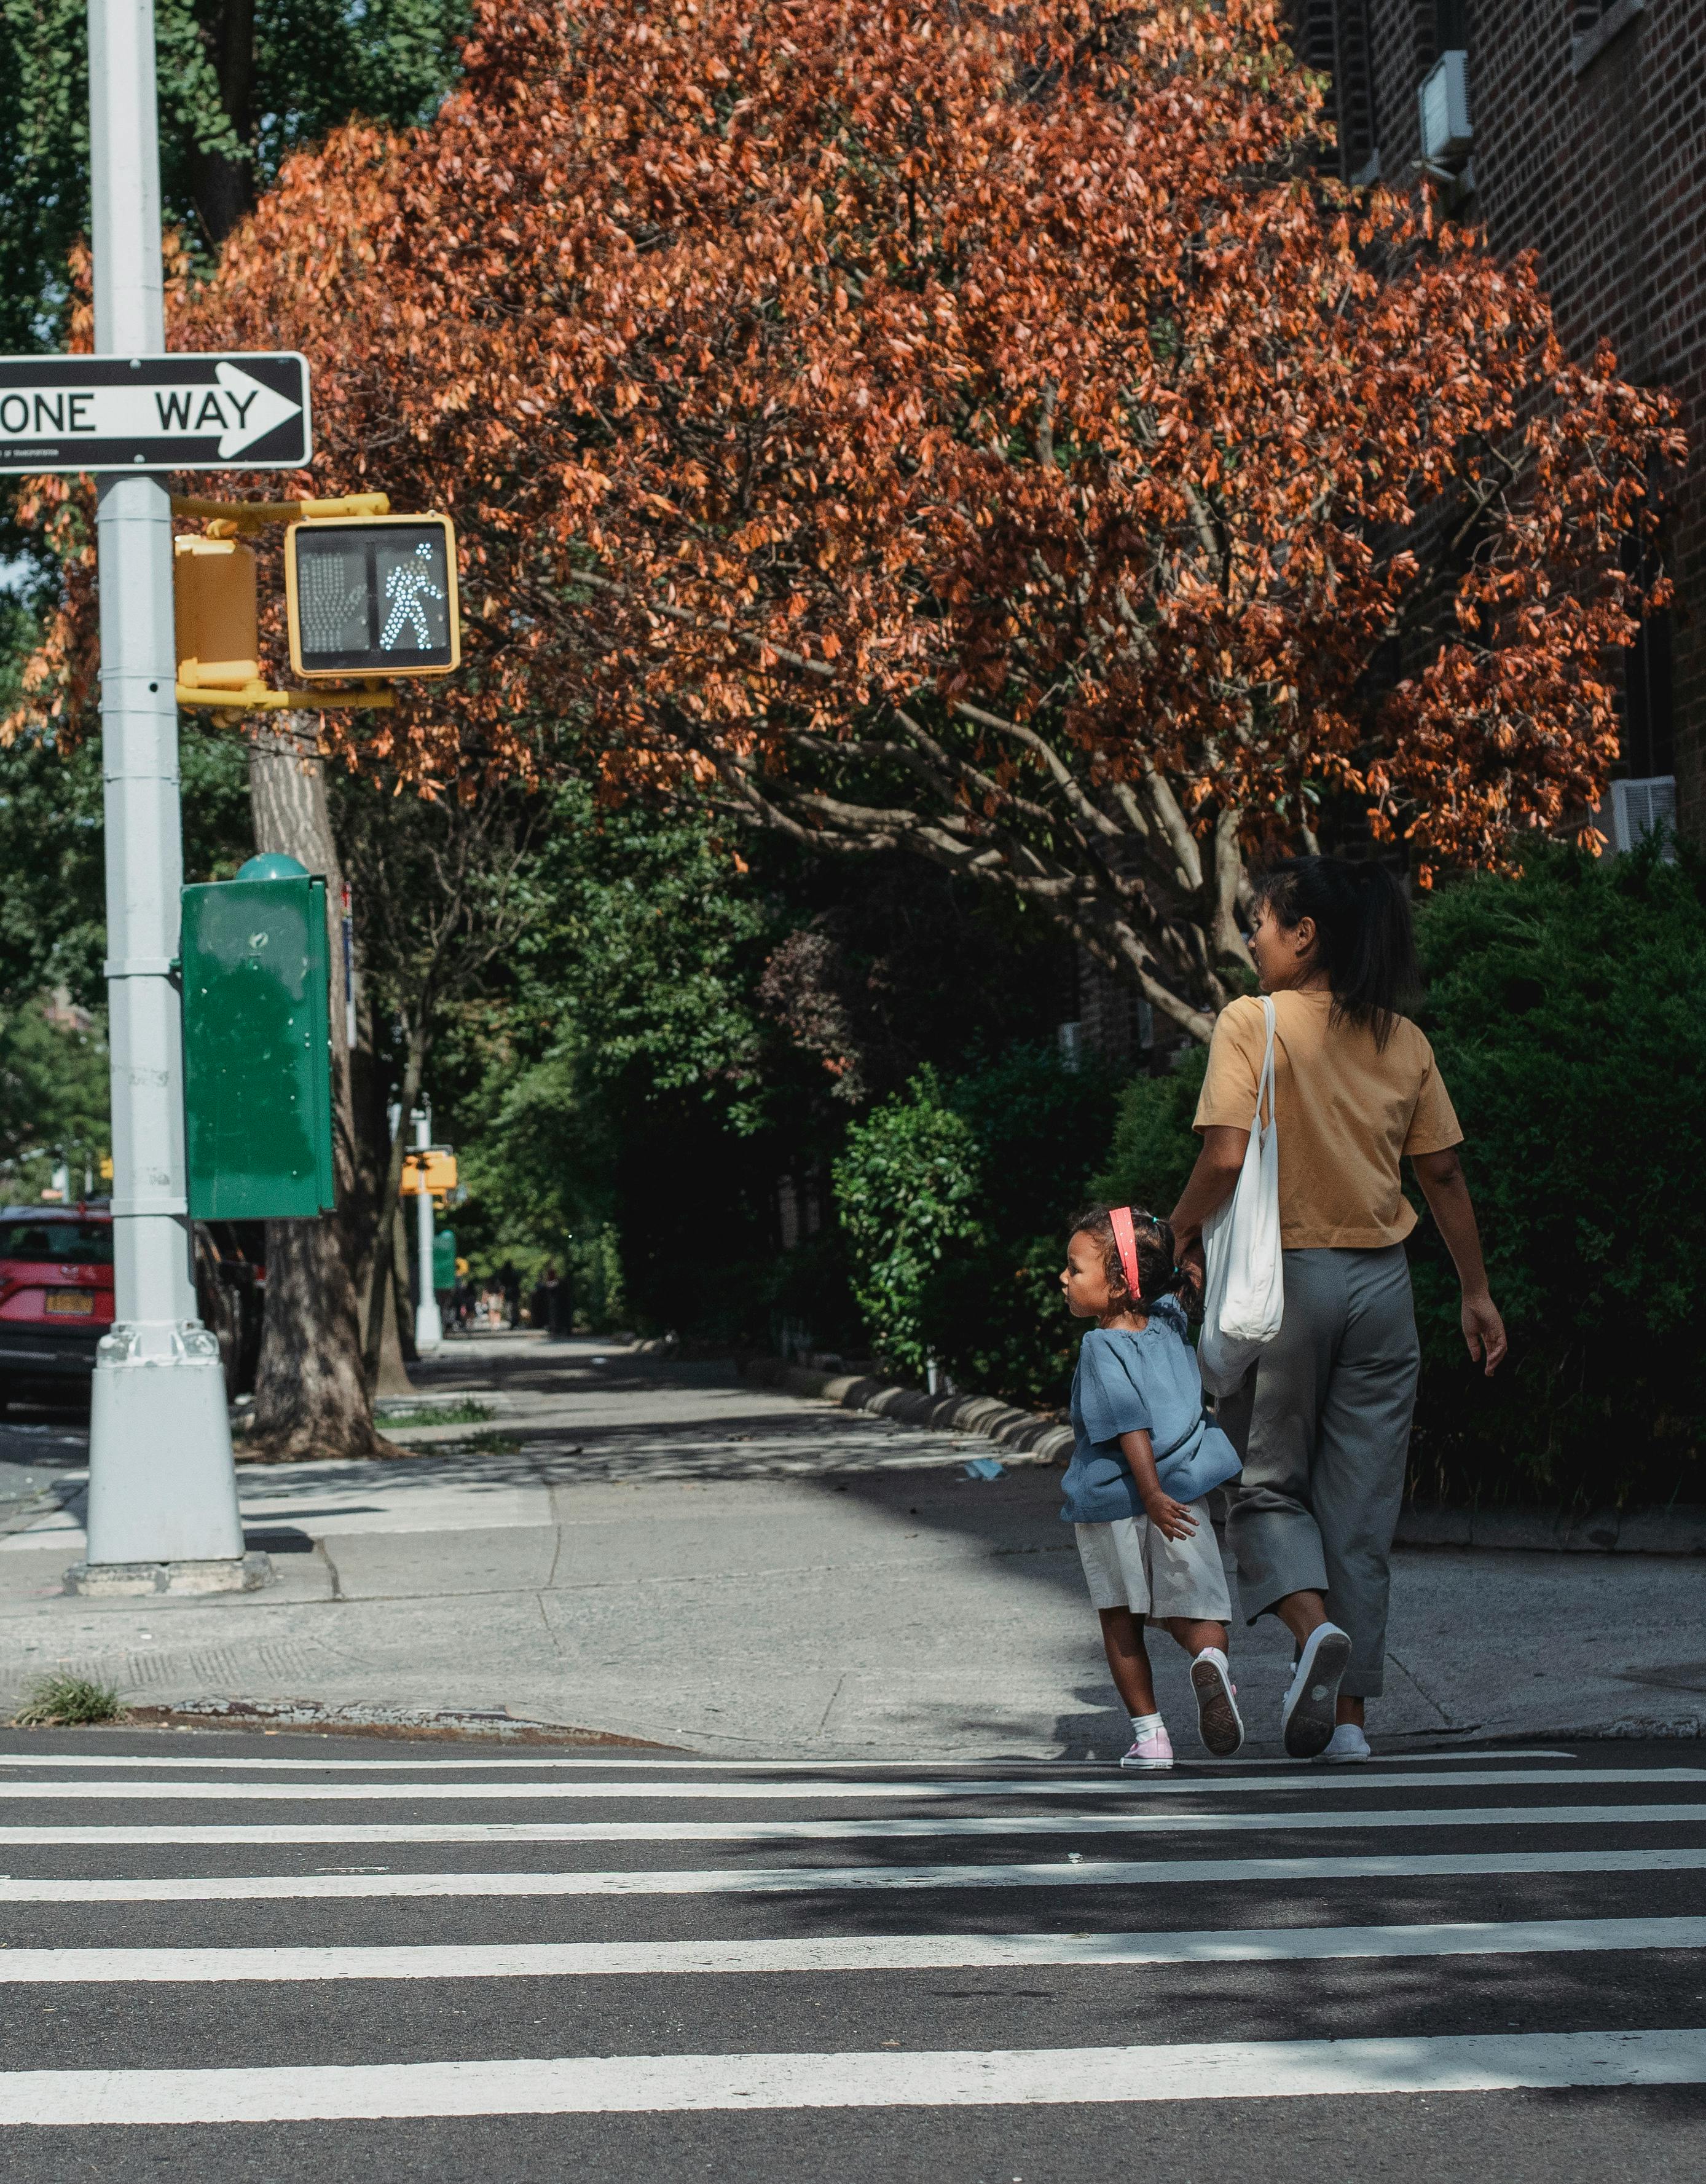 A woman and young girl crossing a road | Source: Pexels